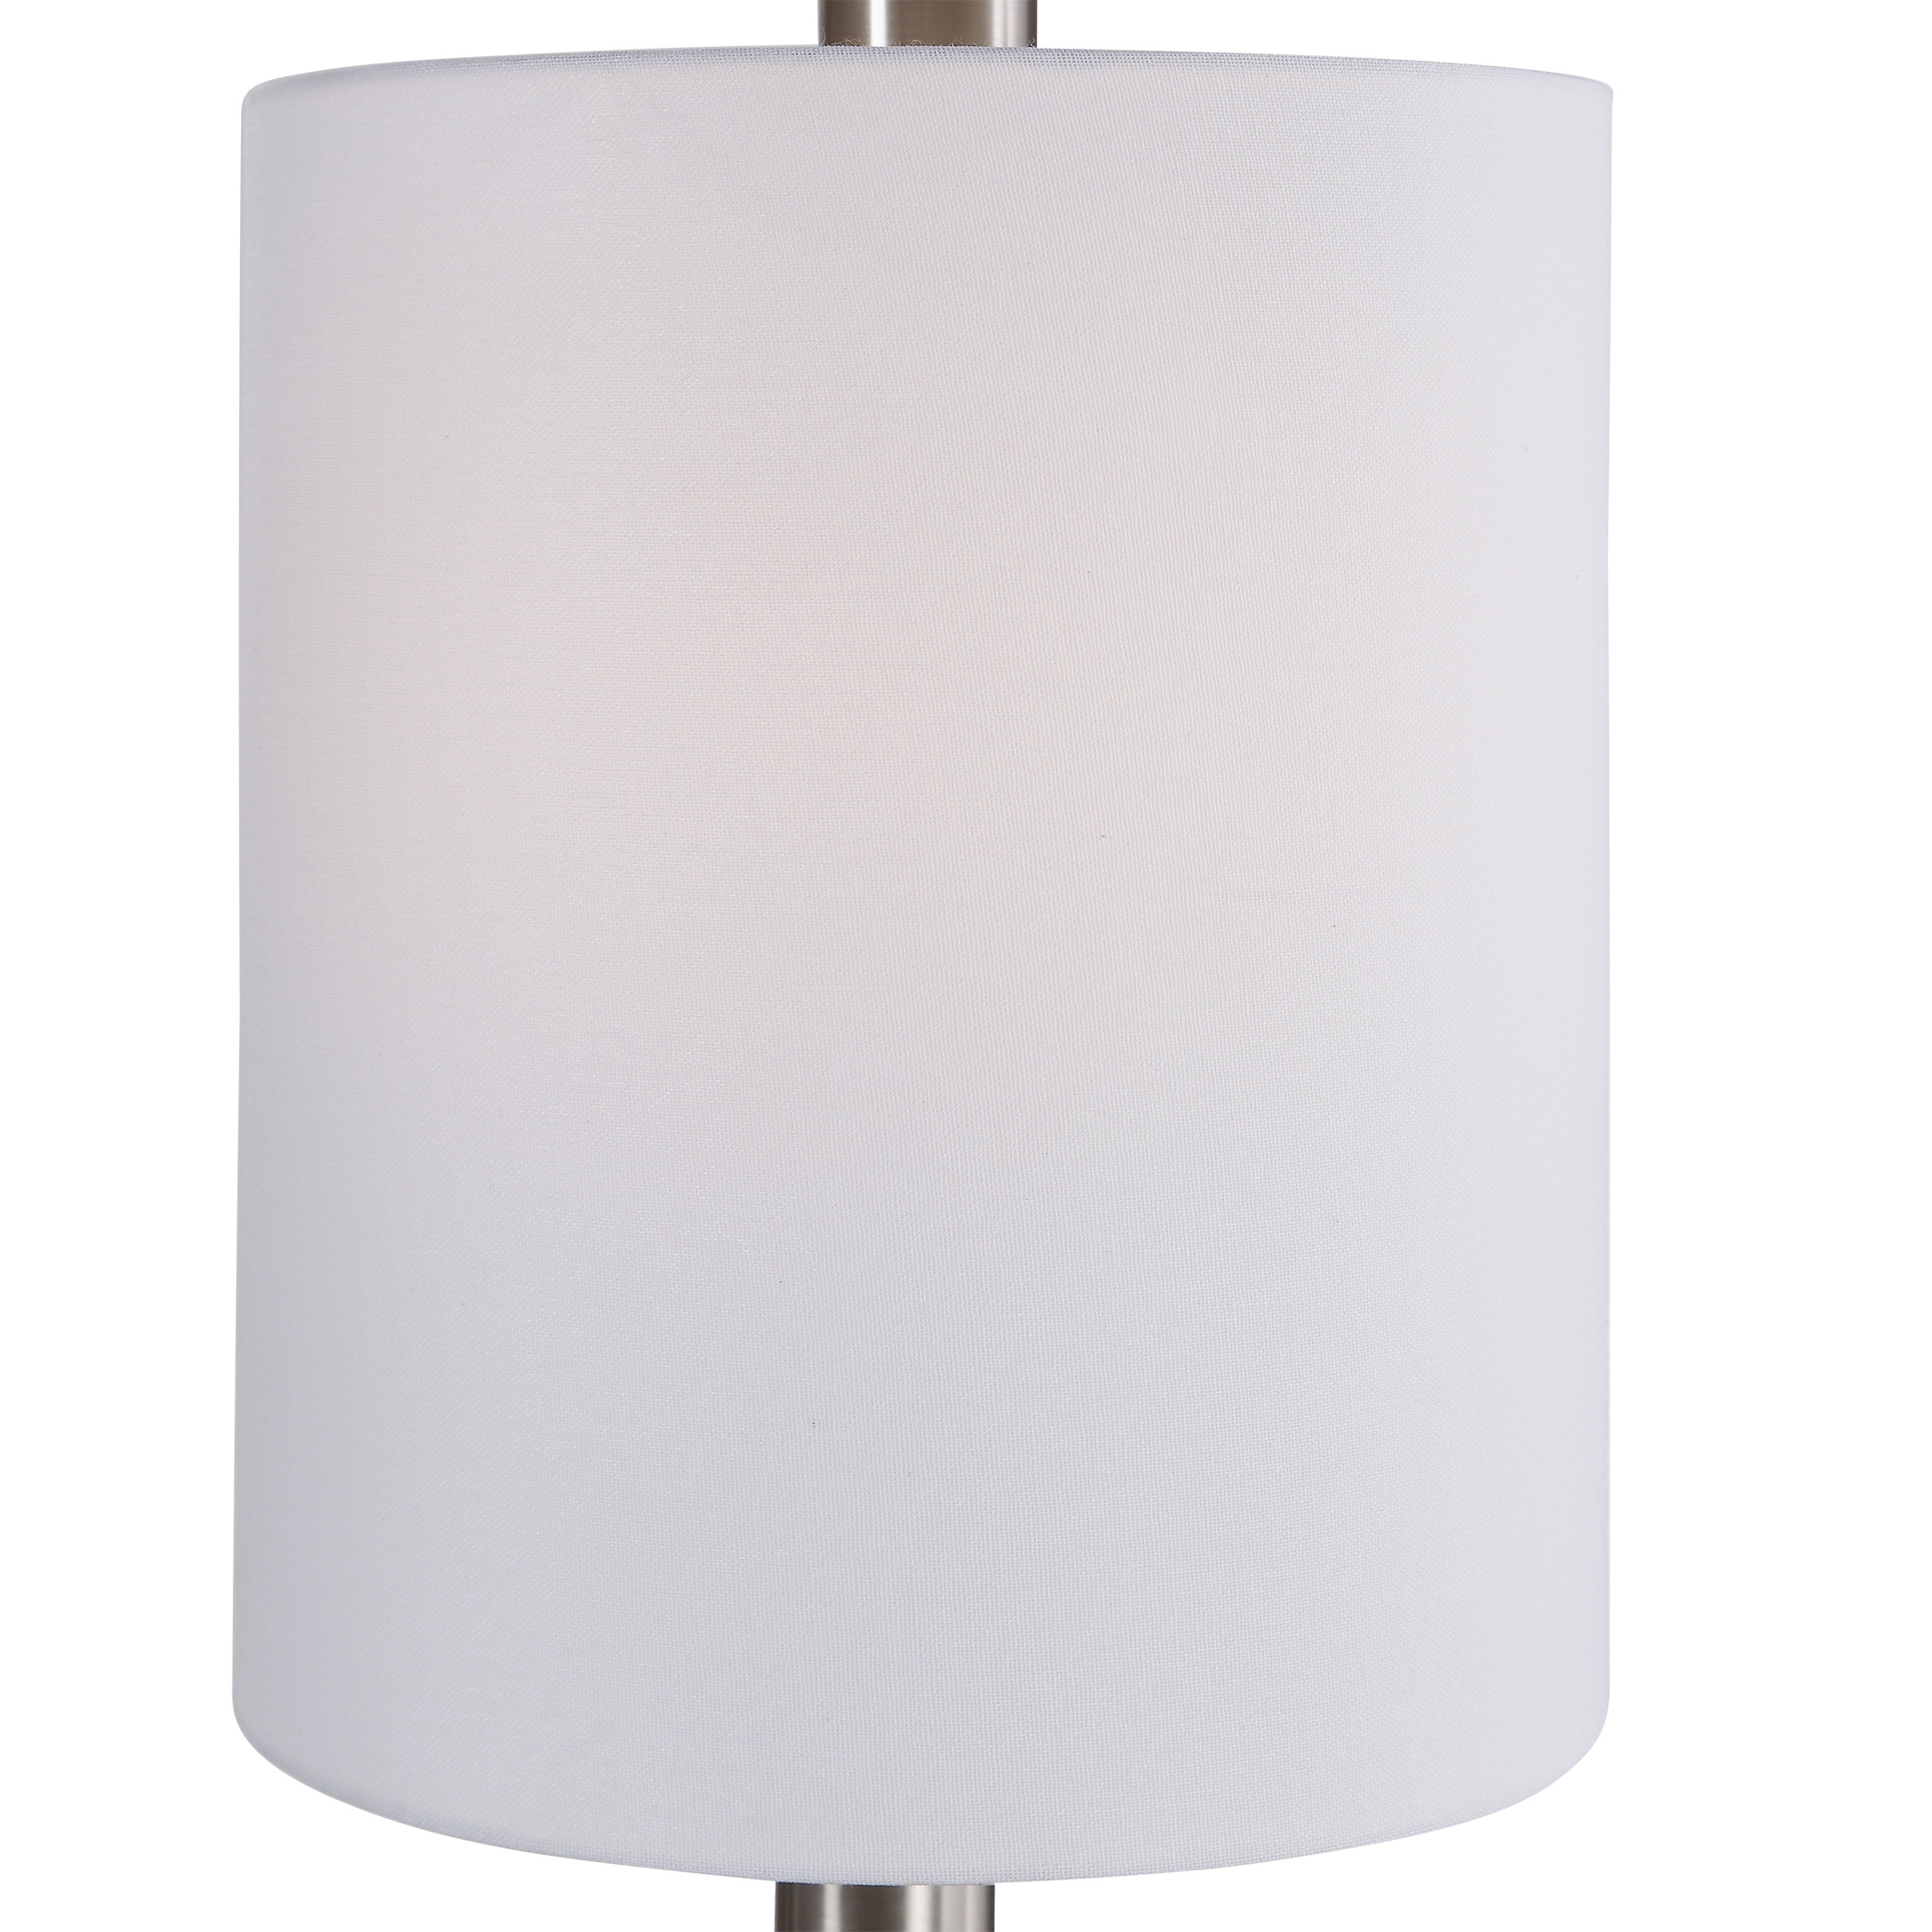 Aderia Sage Green Accent Lamp - Image 4